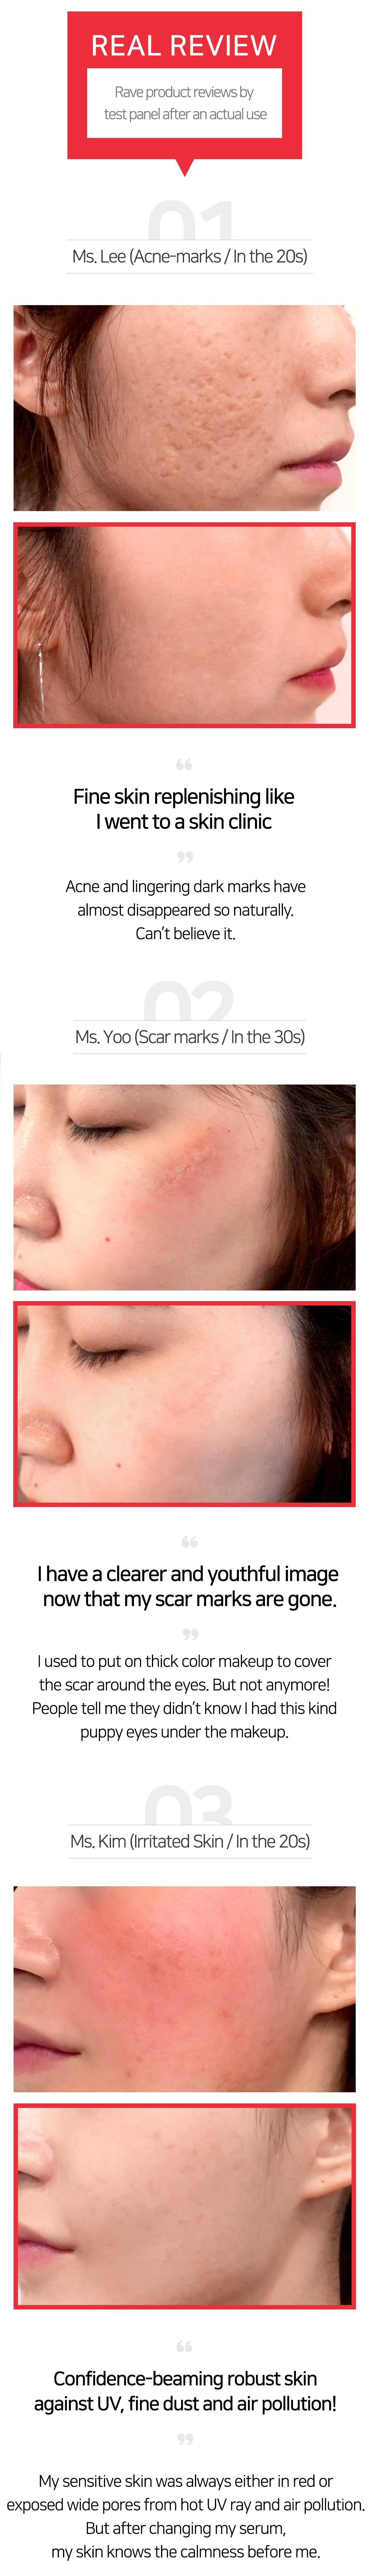 Scar Reviews-(before-and-after)